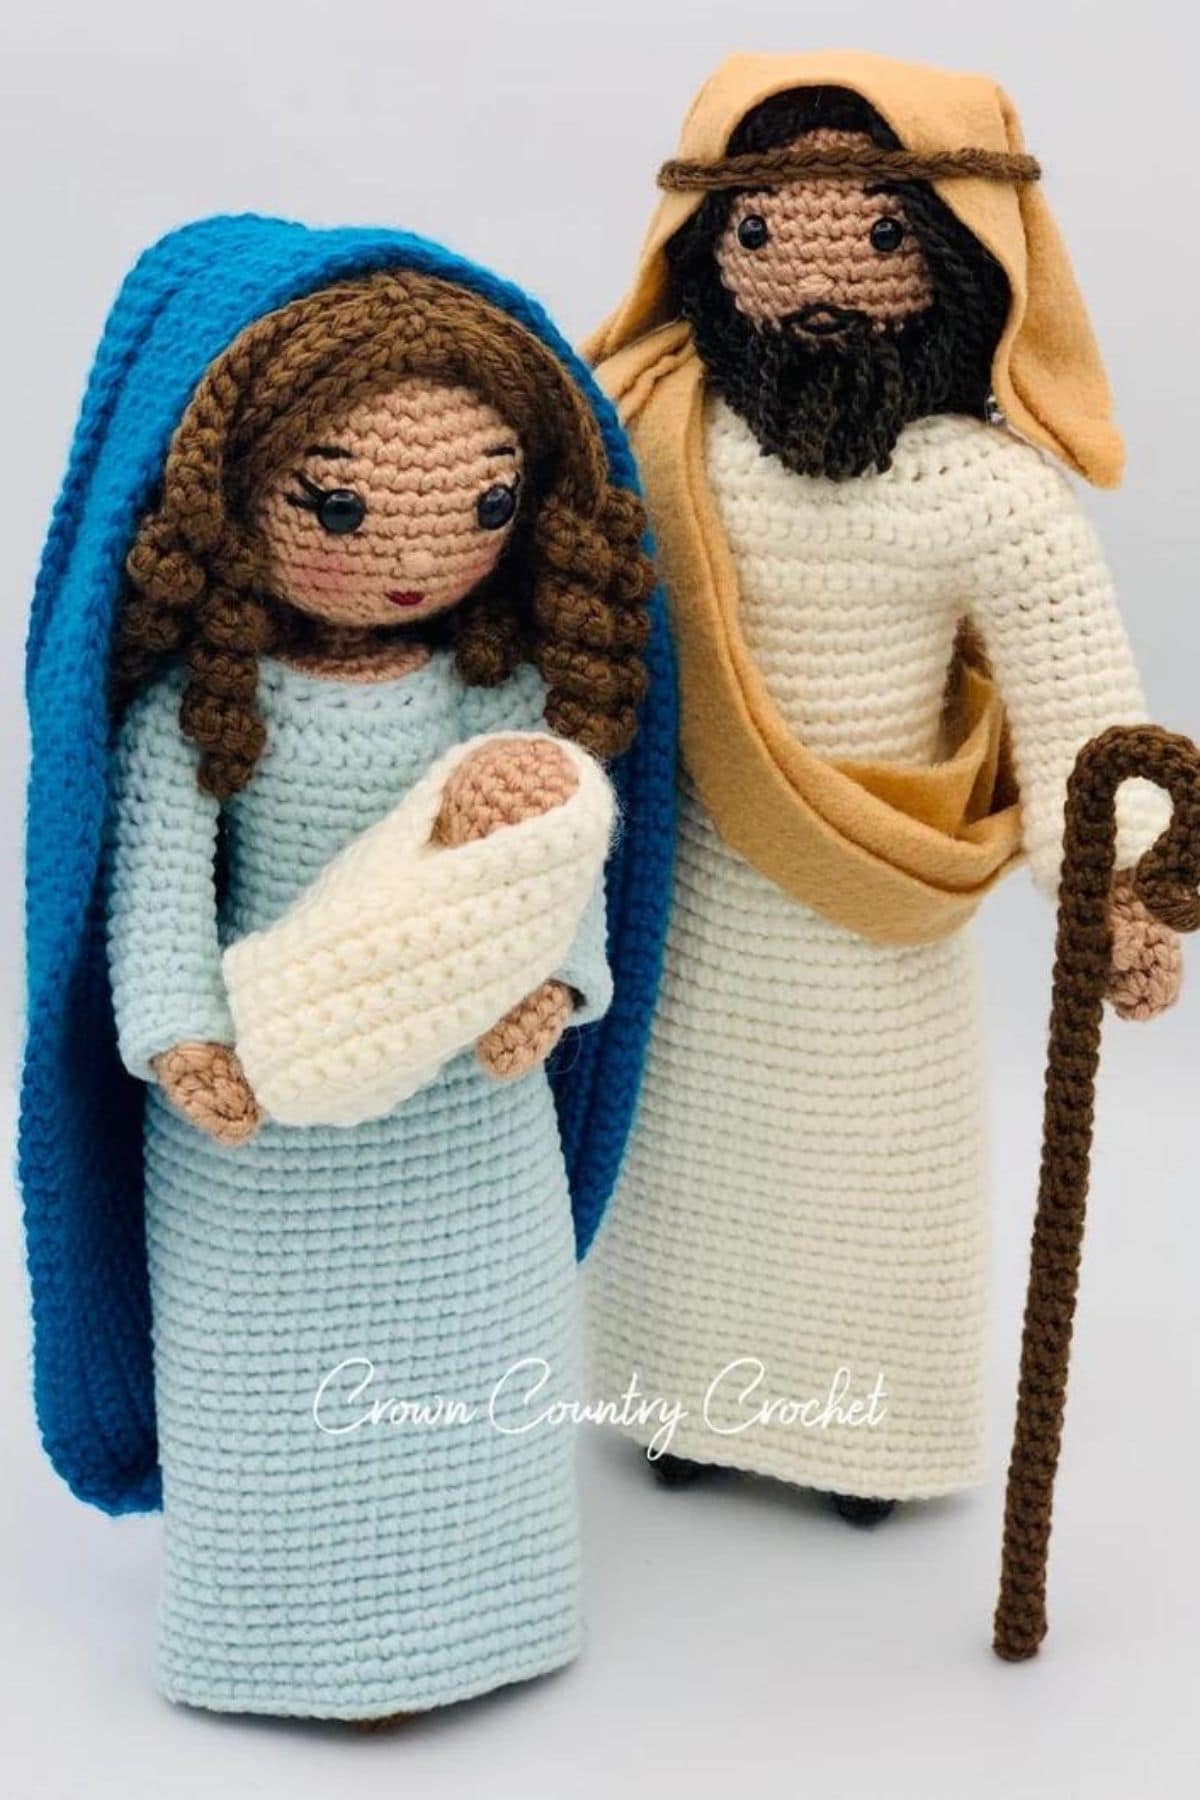 Large crochet Mary and Joseph dolls standing with Mary holding a baby Jesus in her arms in a white blanket.